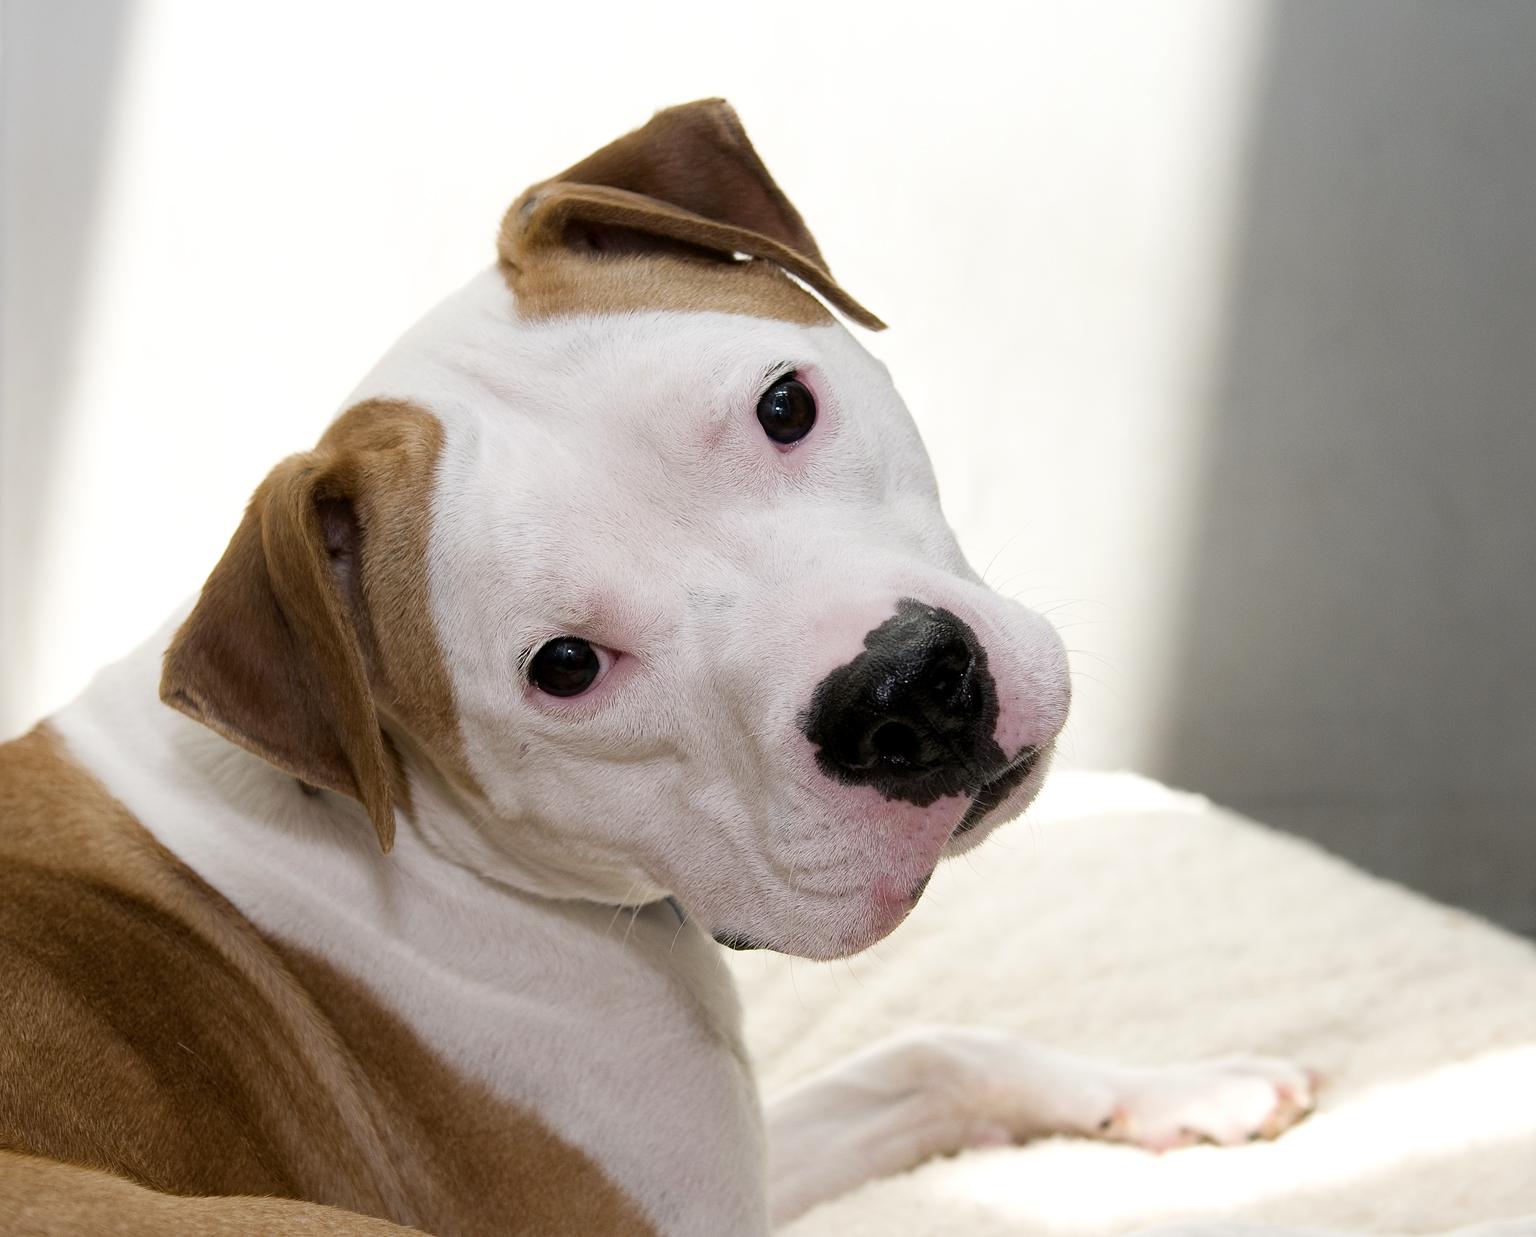 This 3-year-old American bulldog mix found himself at the Washington Animal Rescue League because of a change in his human companion’s lifestyle.